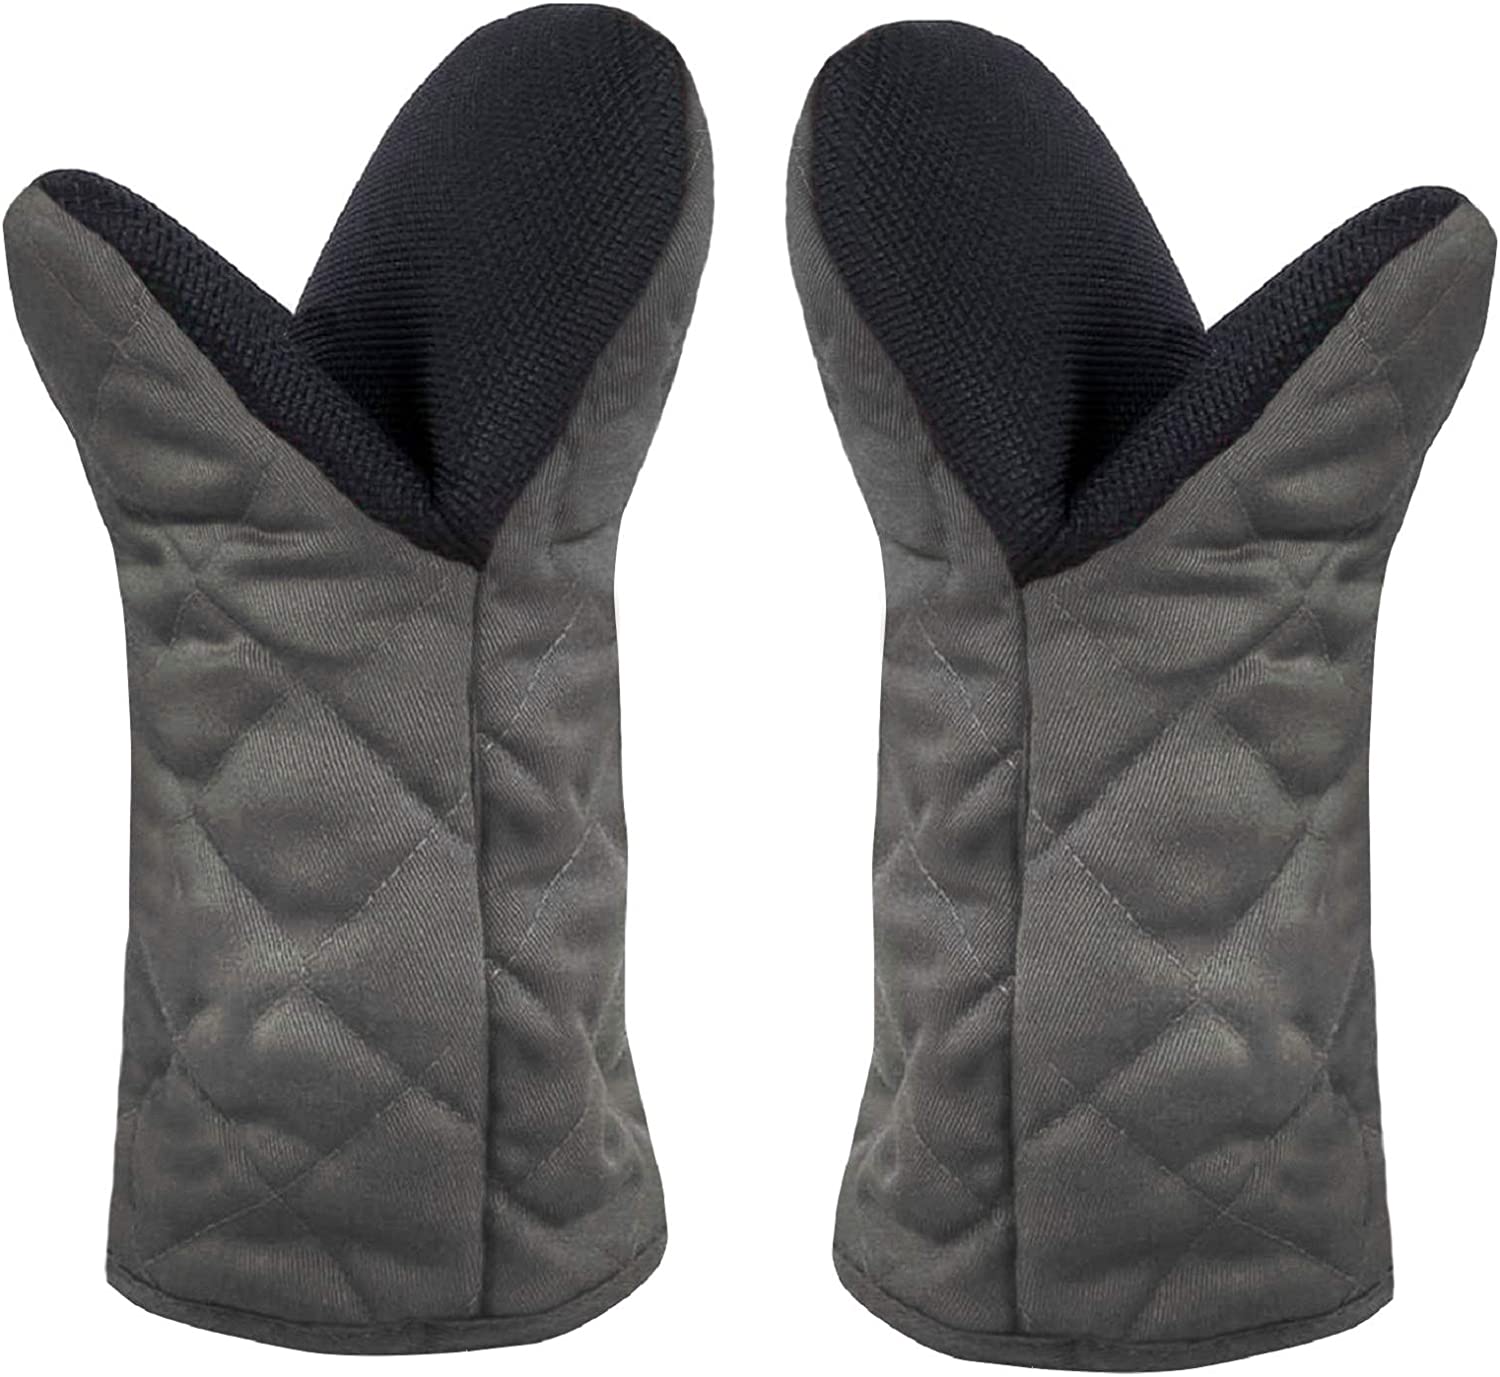  Rubber Oven Mitts 